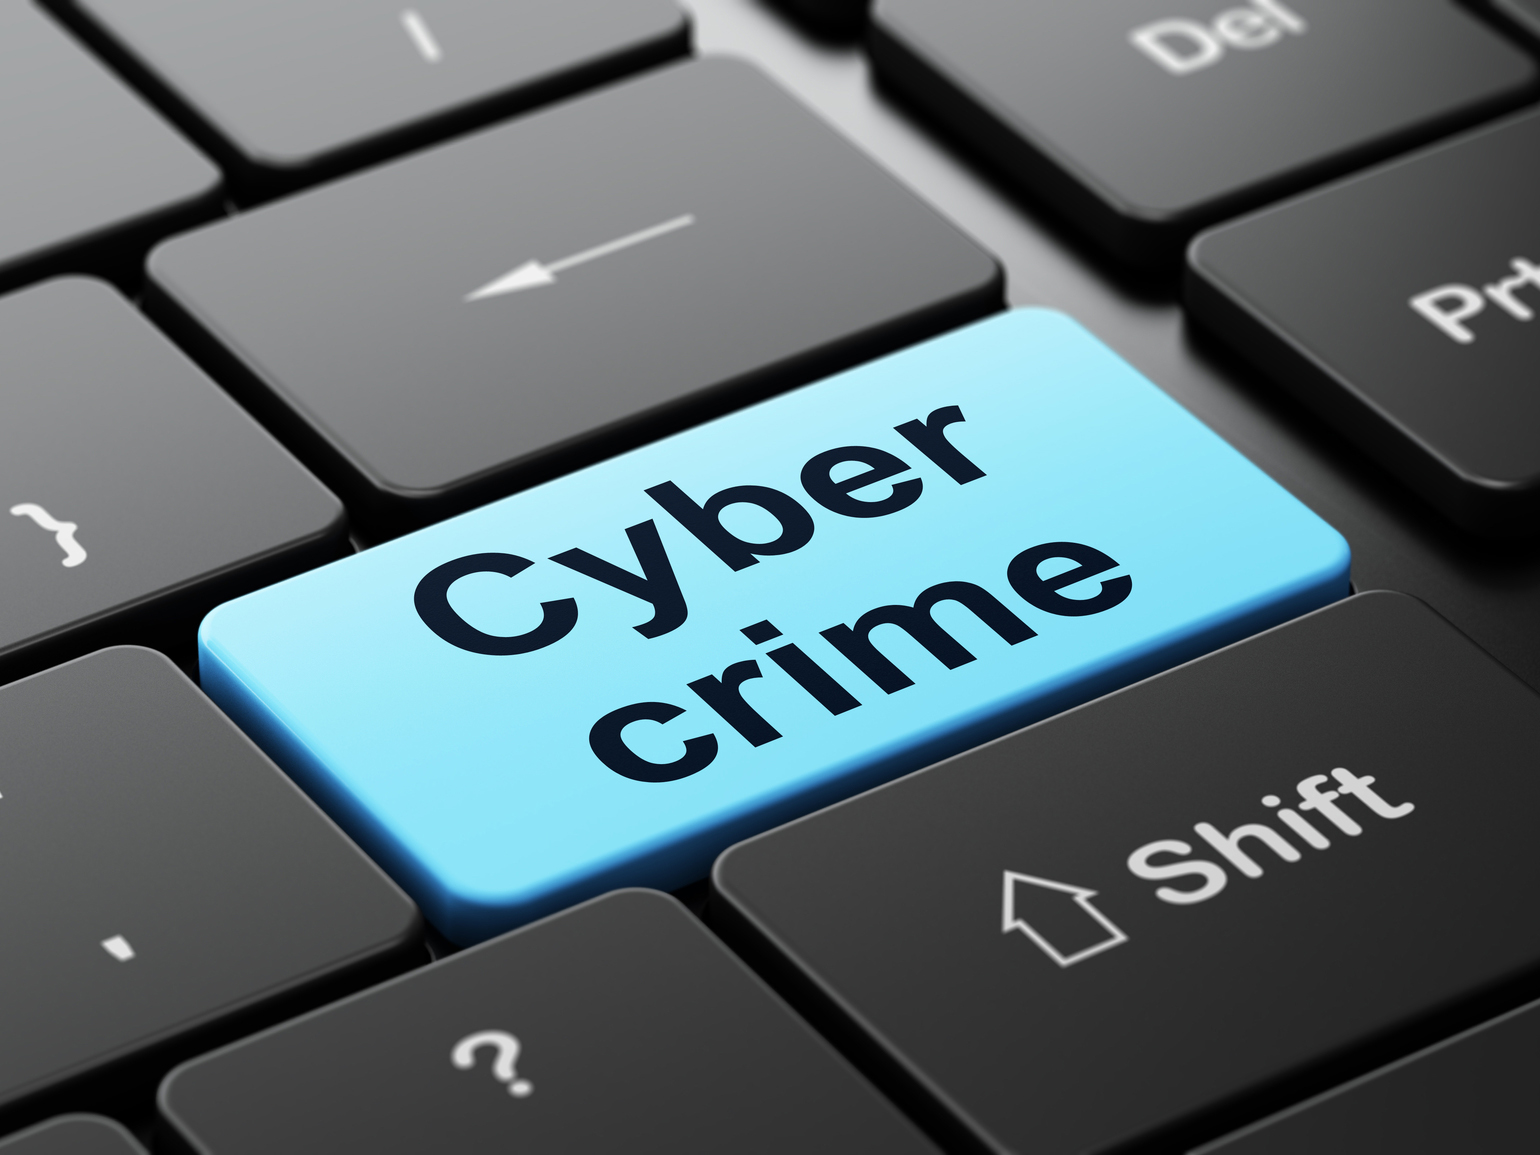 Security concept: Cyber Crime on computer keyboard background